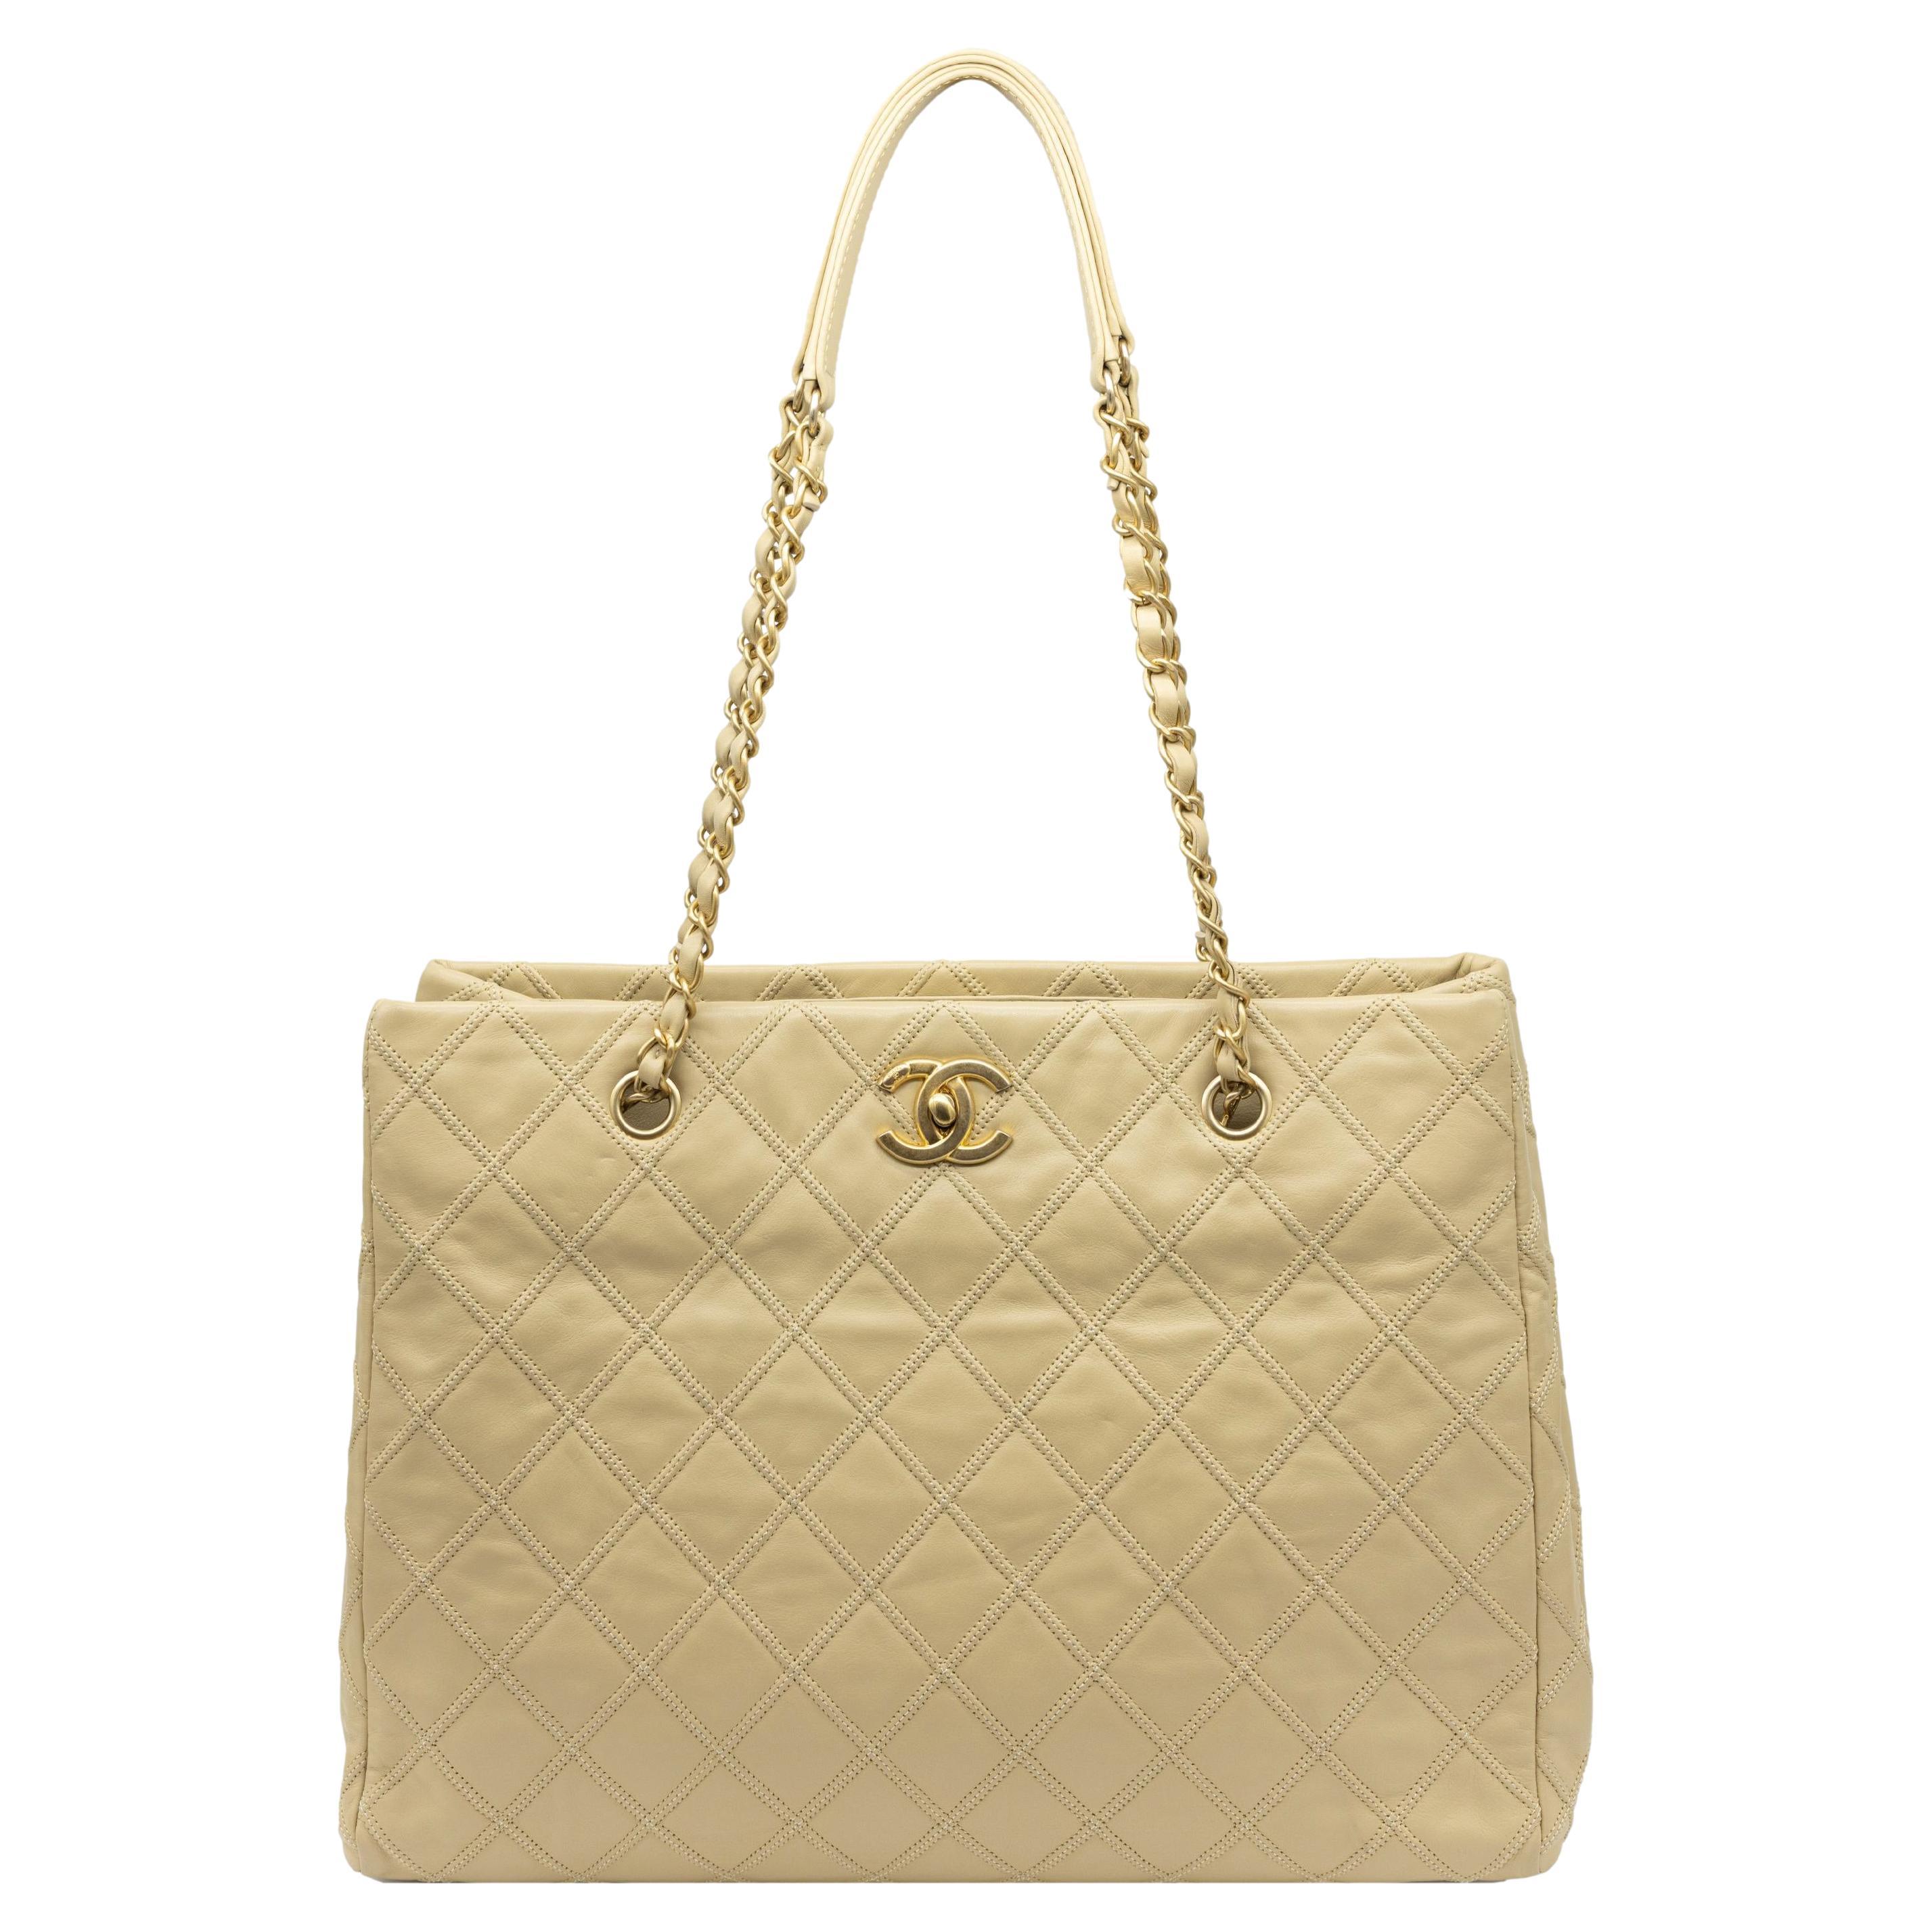 Chanel Quilted Beige Calfskin Thin City Accordion Turnlock Large Tote Bag, 2013.